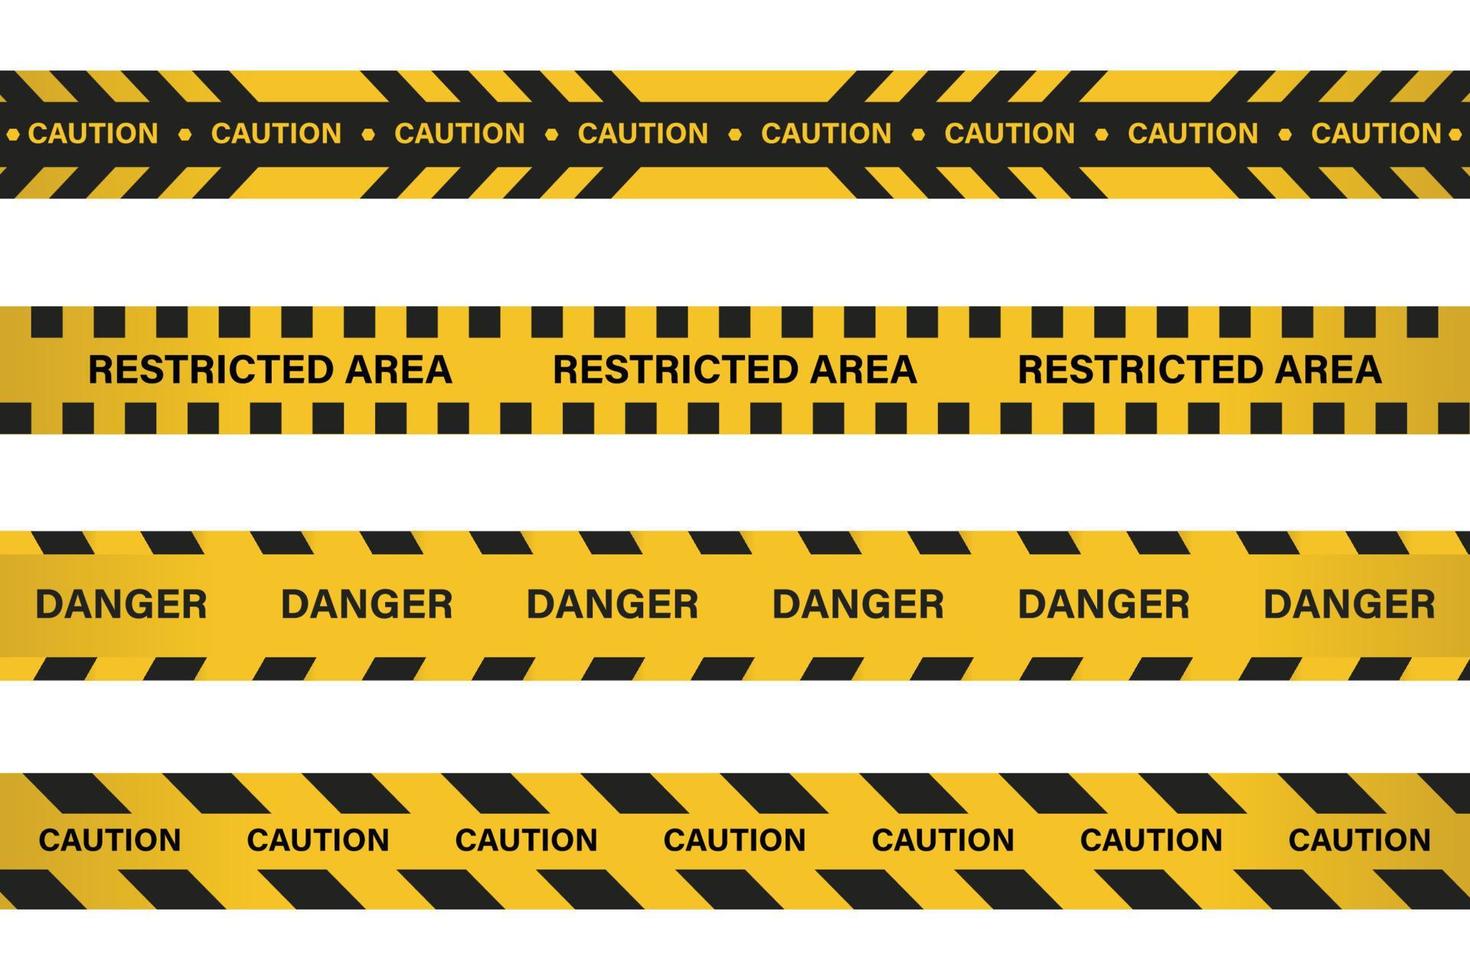 Restricted area, danger tape with yellow and black color. Caution tape for police, accident, under construction, website. Vector warning sign set. Caution tape set with black and yellow warning tape.